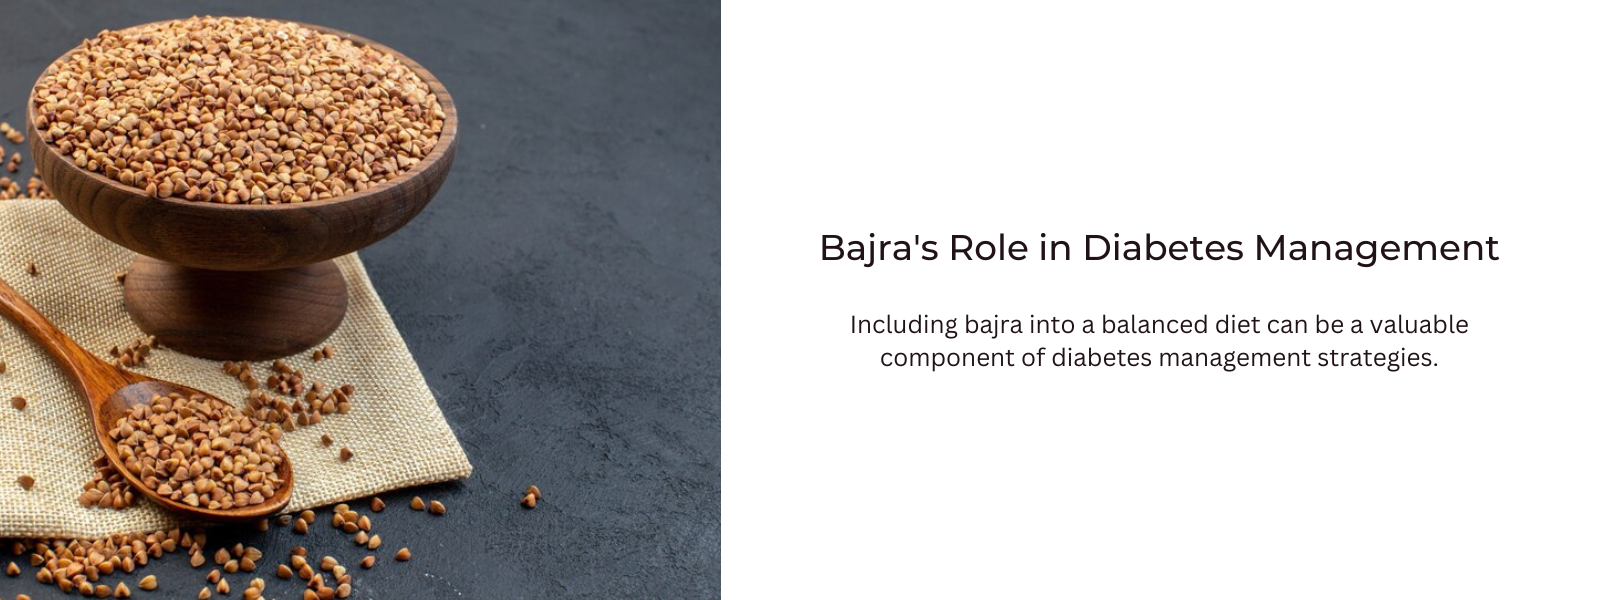 Bajra's Role in Diabetes Management: What You Need to Know